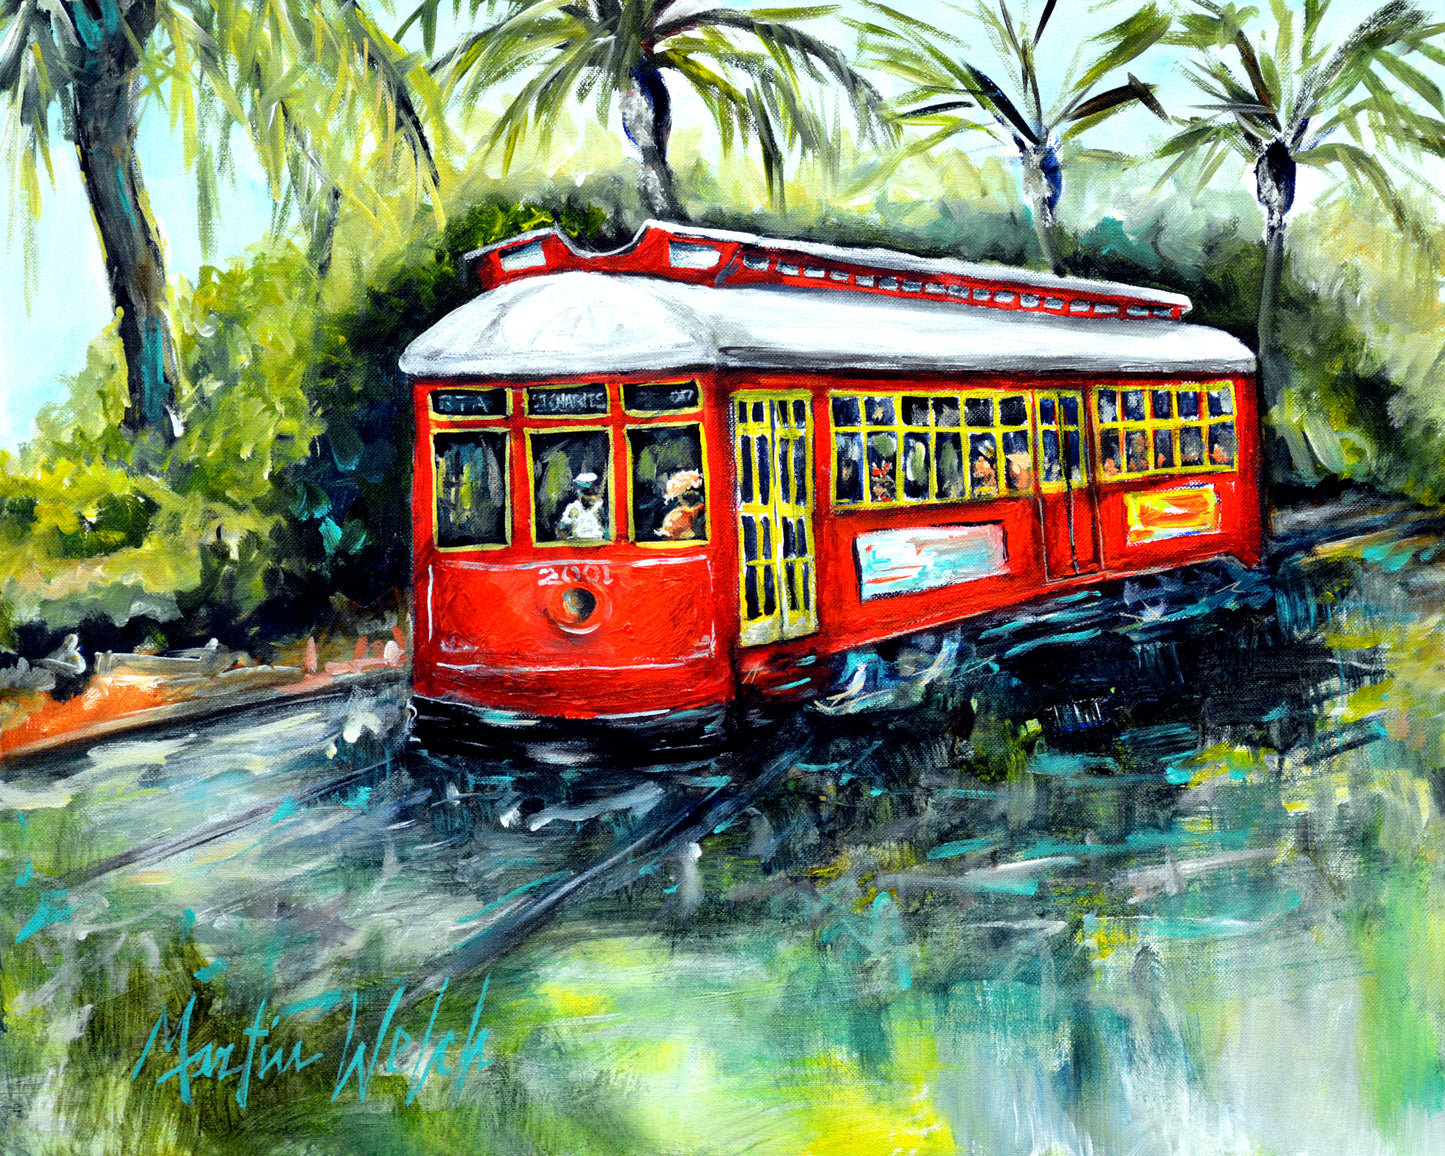 Little Red - New Orleans Streetcar - 11"x14" Print